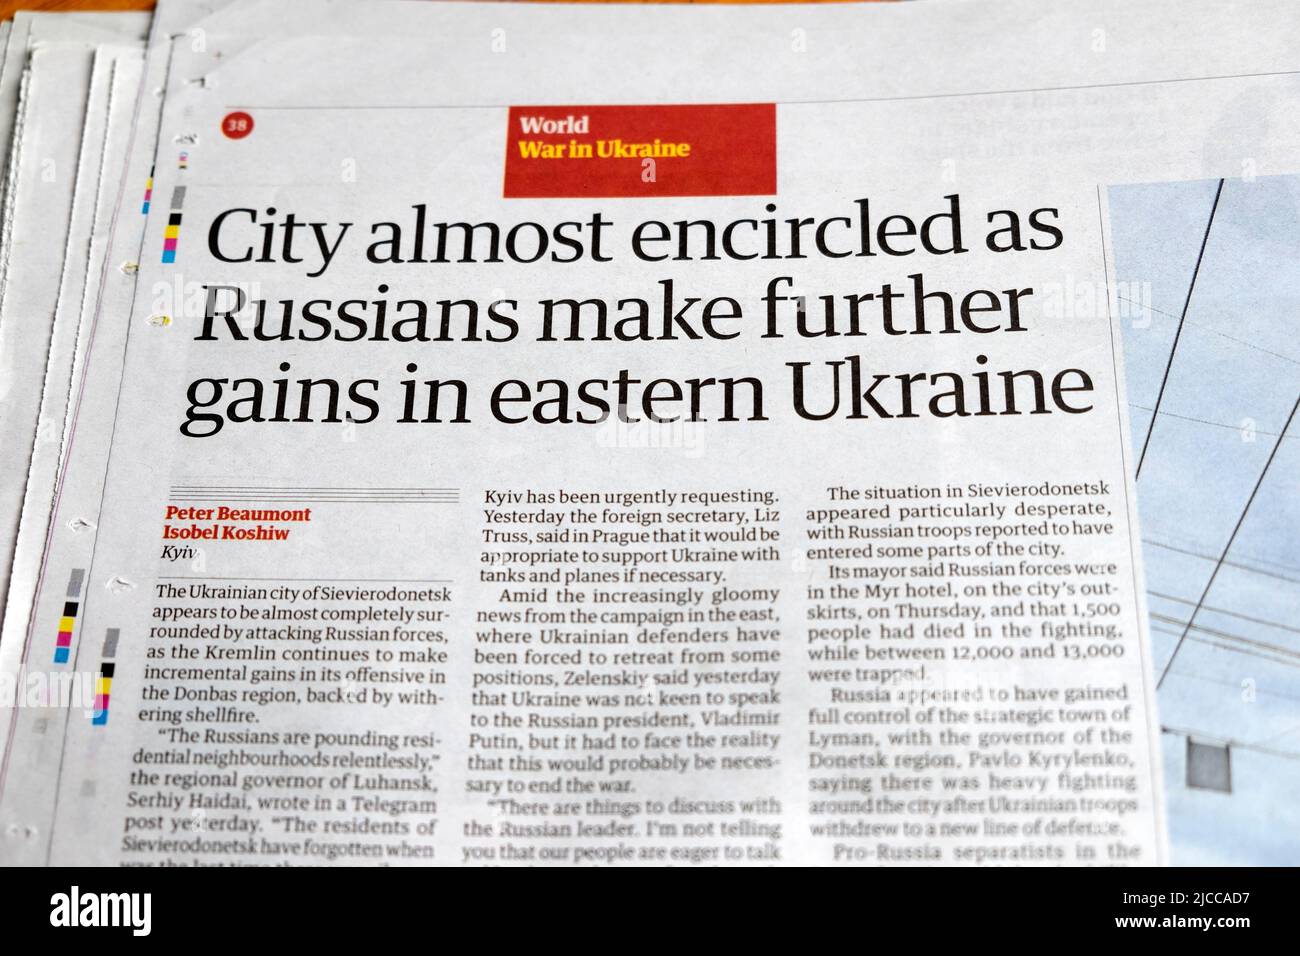 'City almost encircled as Russians make further gains in eastern Ukraine' Guardian newspaper headline Sievierodonetsk clipping 27 May 2022 London UK Stock Photo